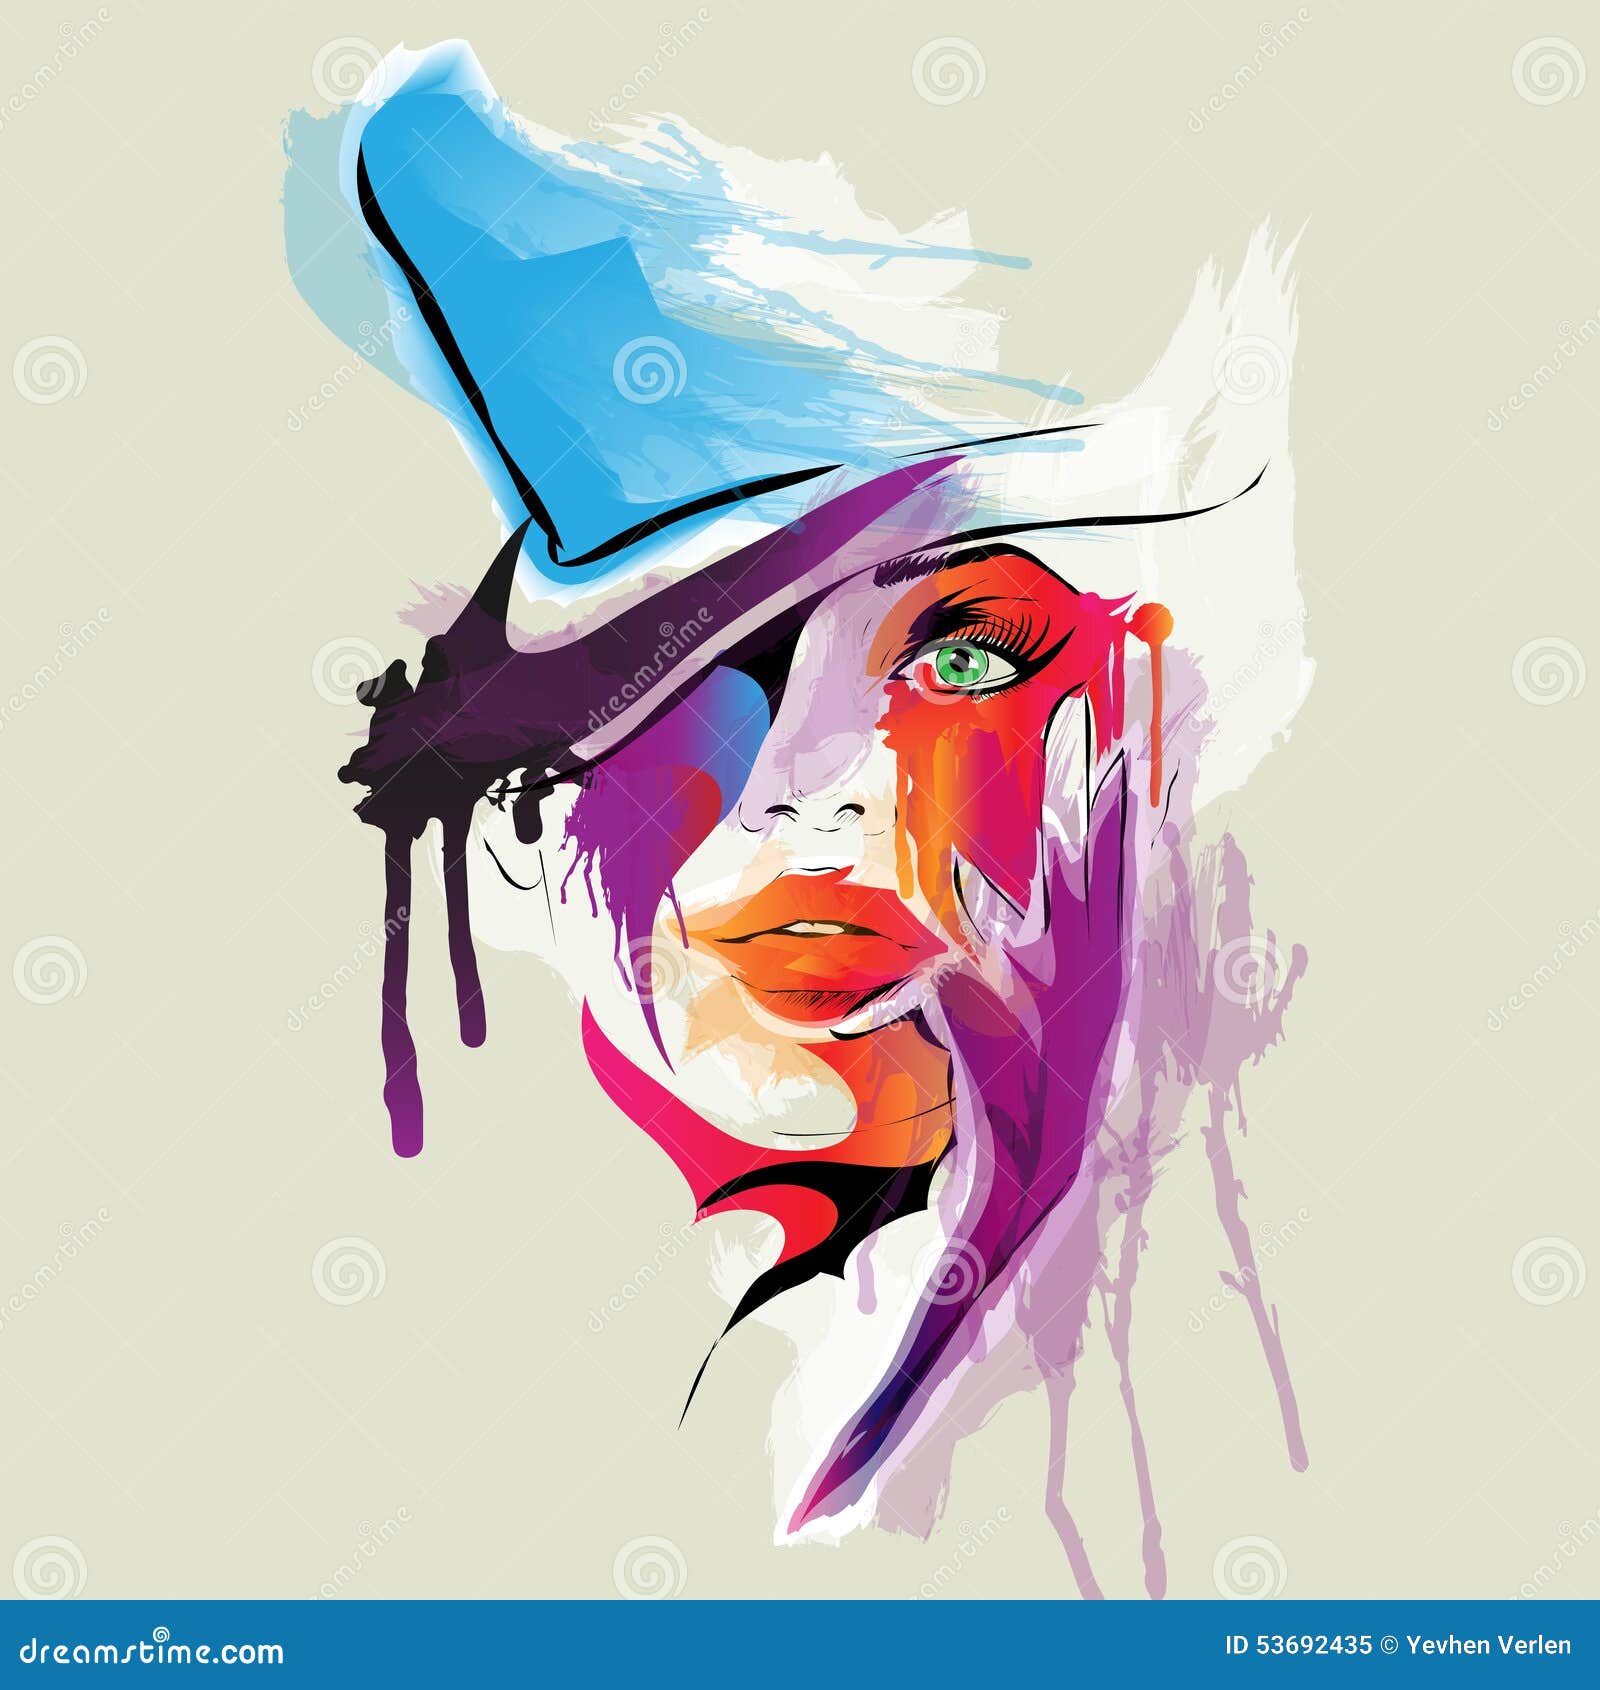 Abstract Woman Face Stock Vector - Image: 53692435